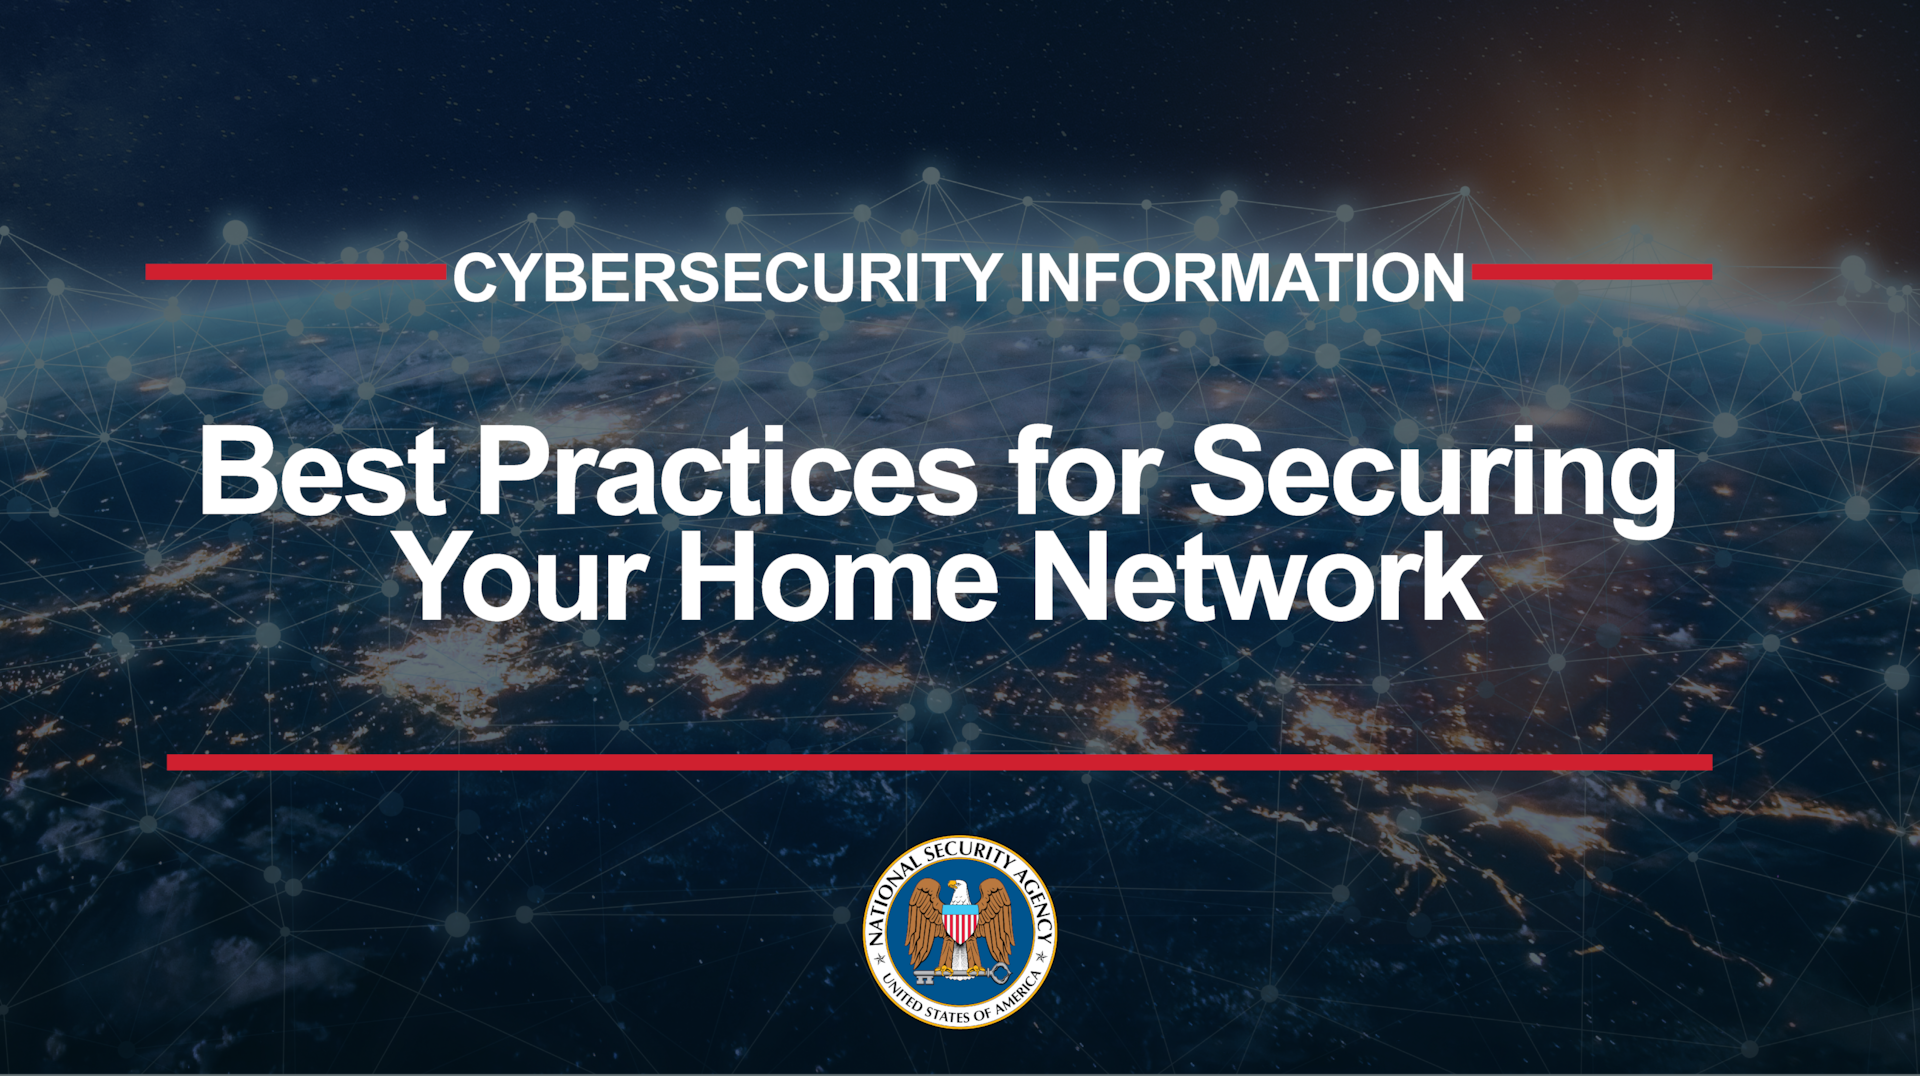 CSI: Best Practices for Securing Your Home Network